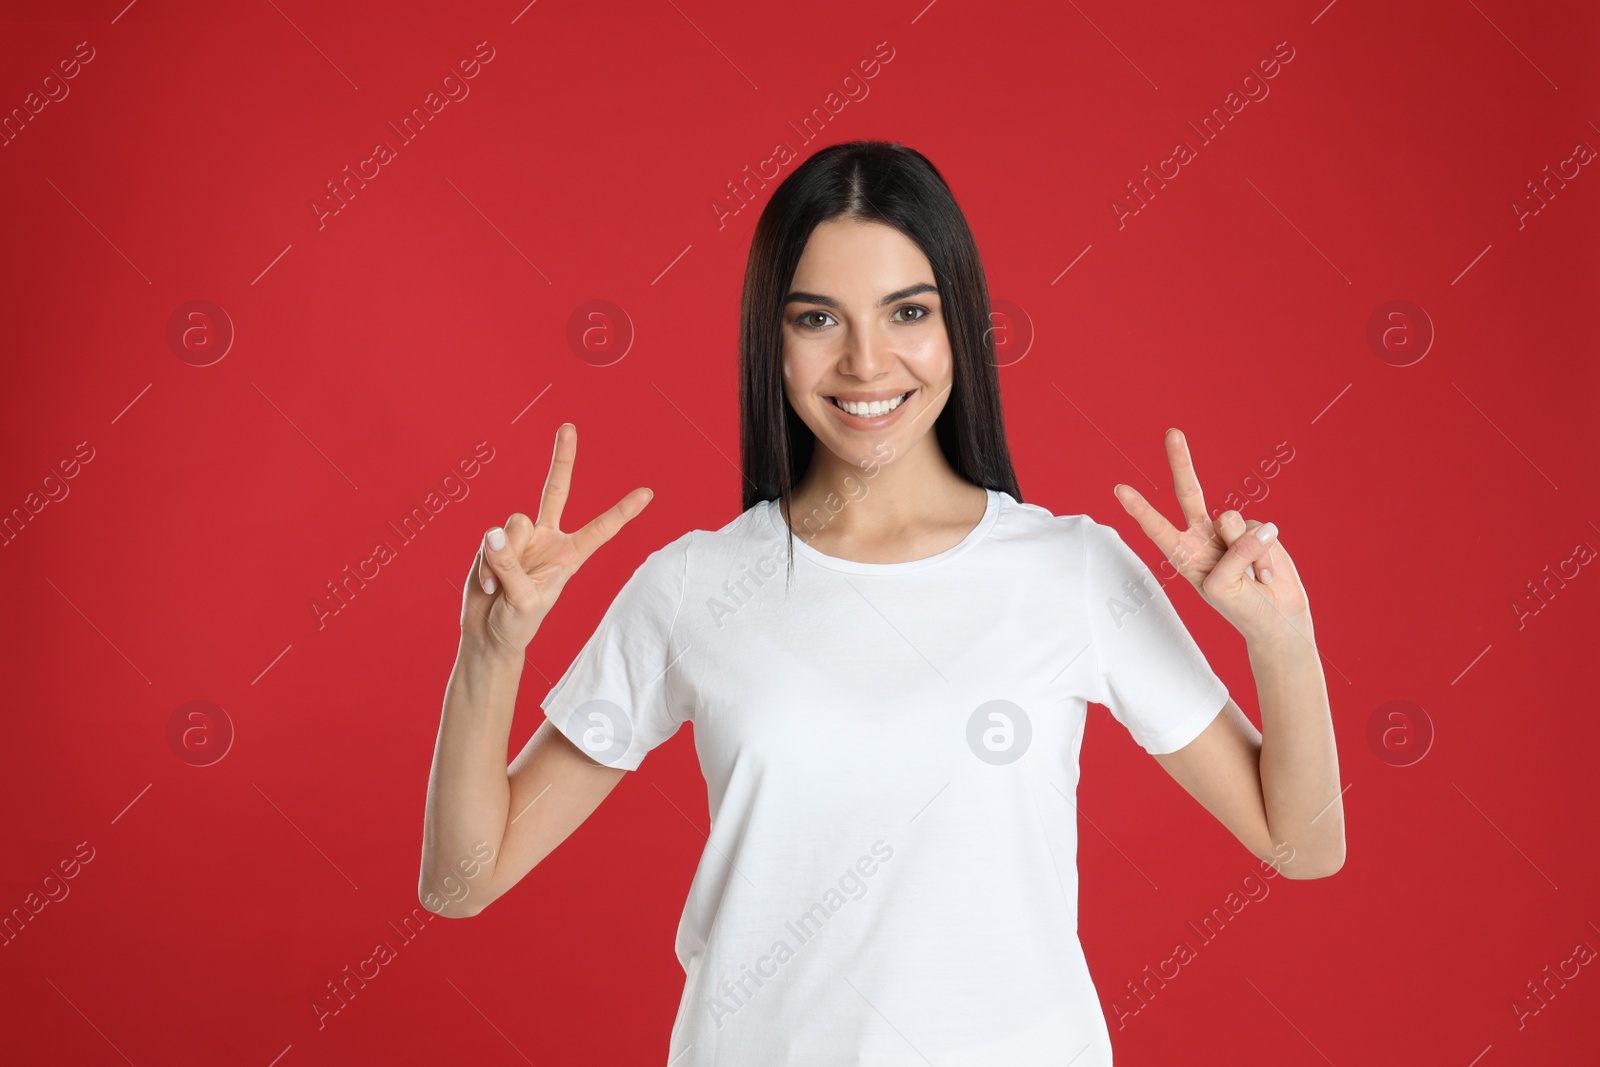 Photo of Woman showing number four with her hands on red background